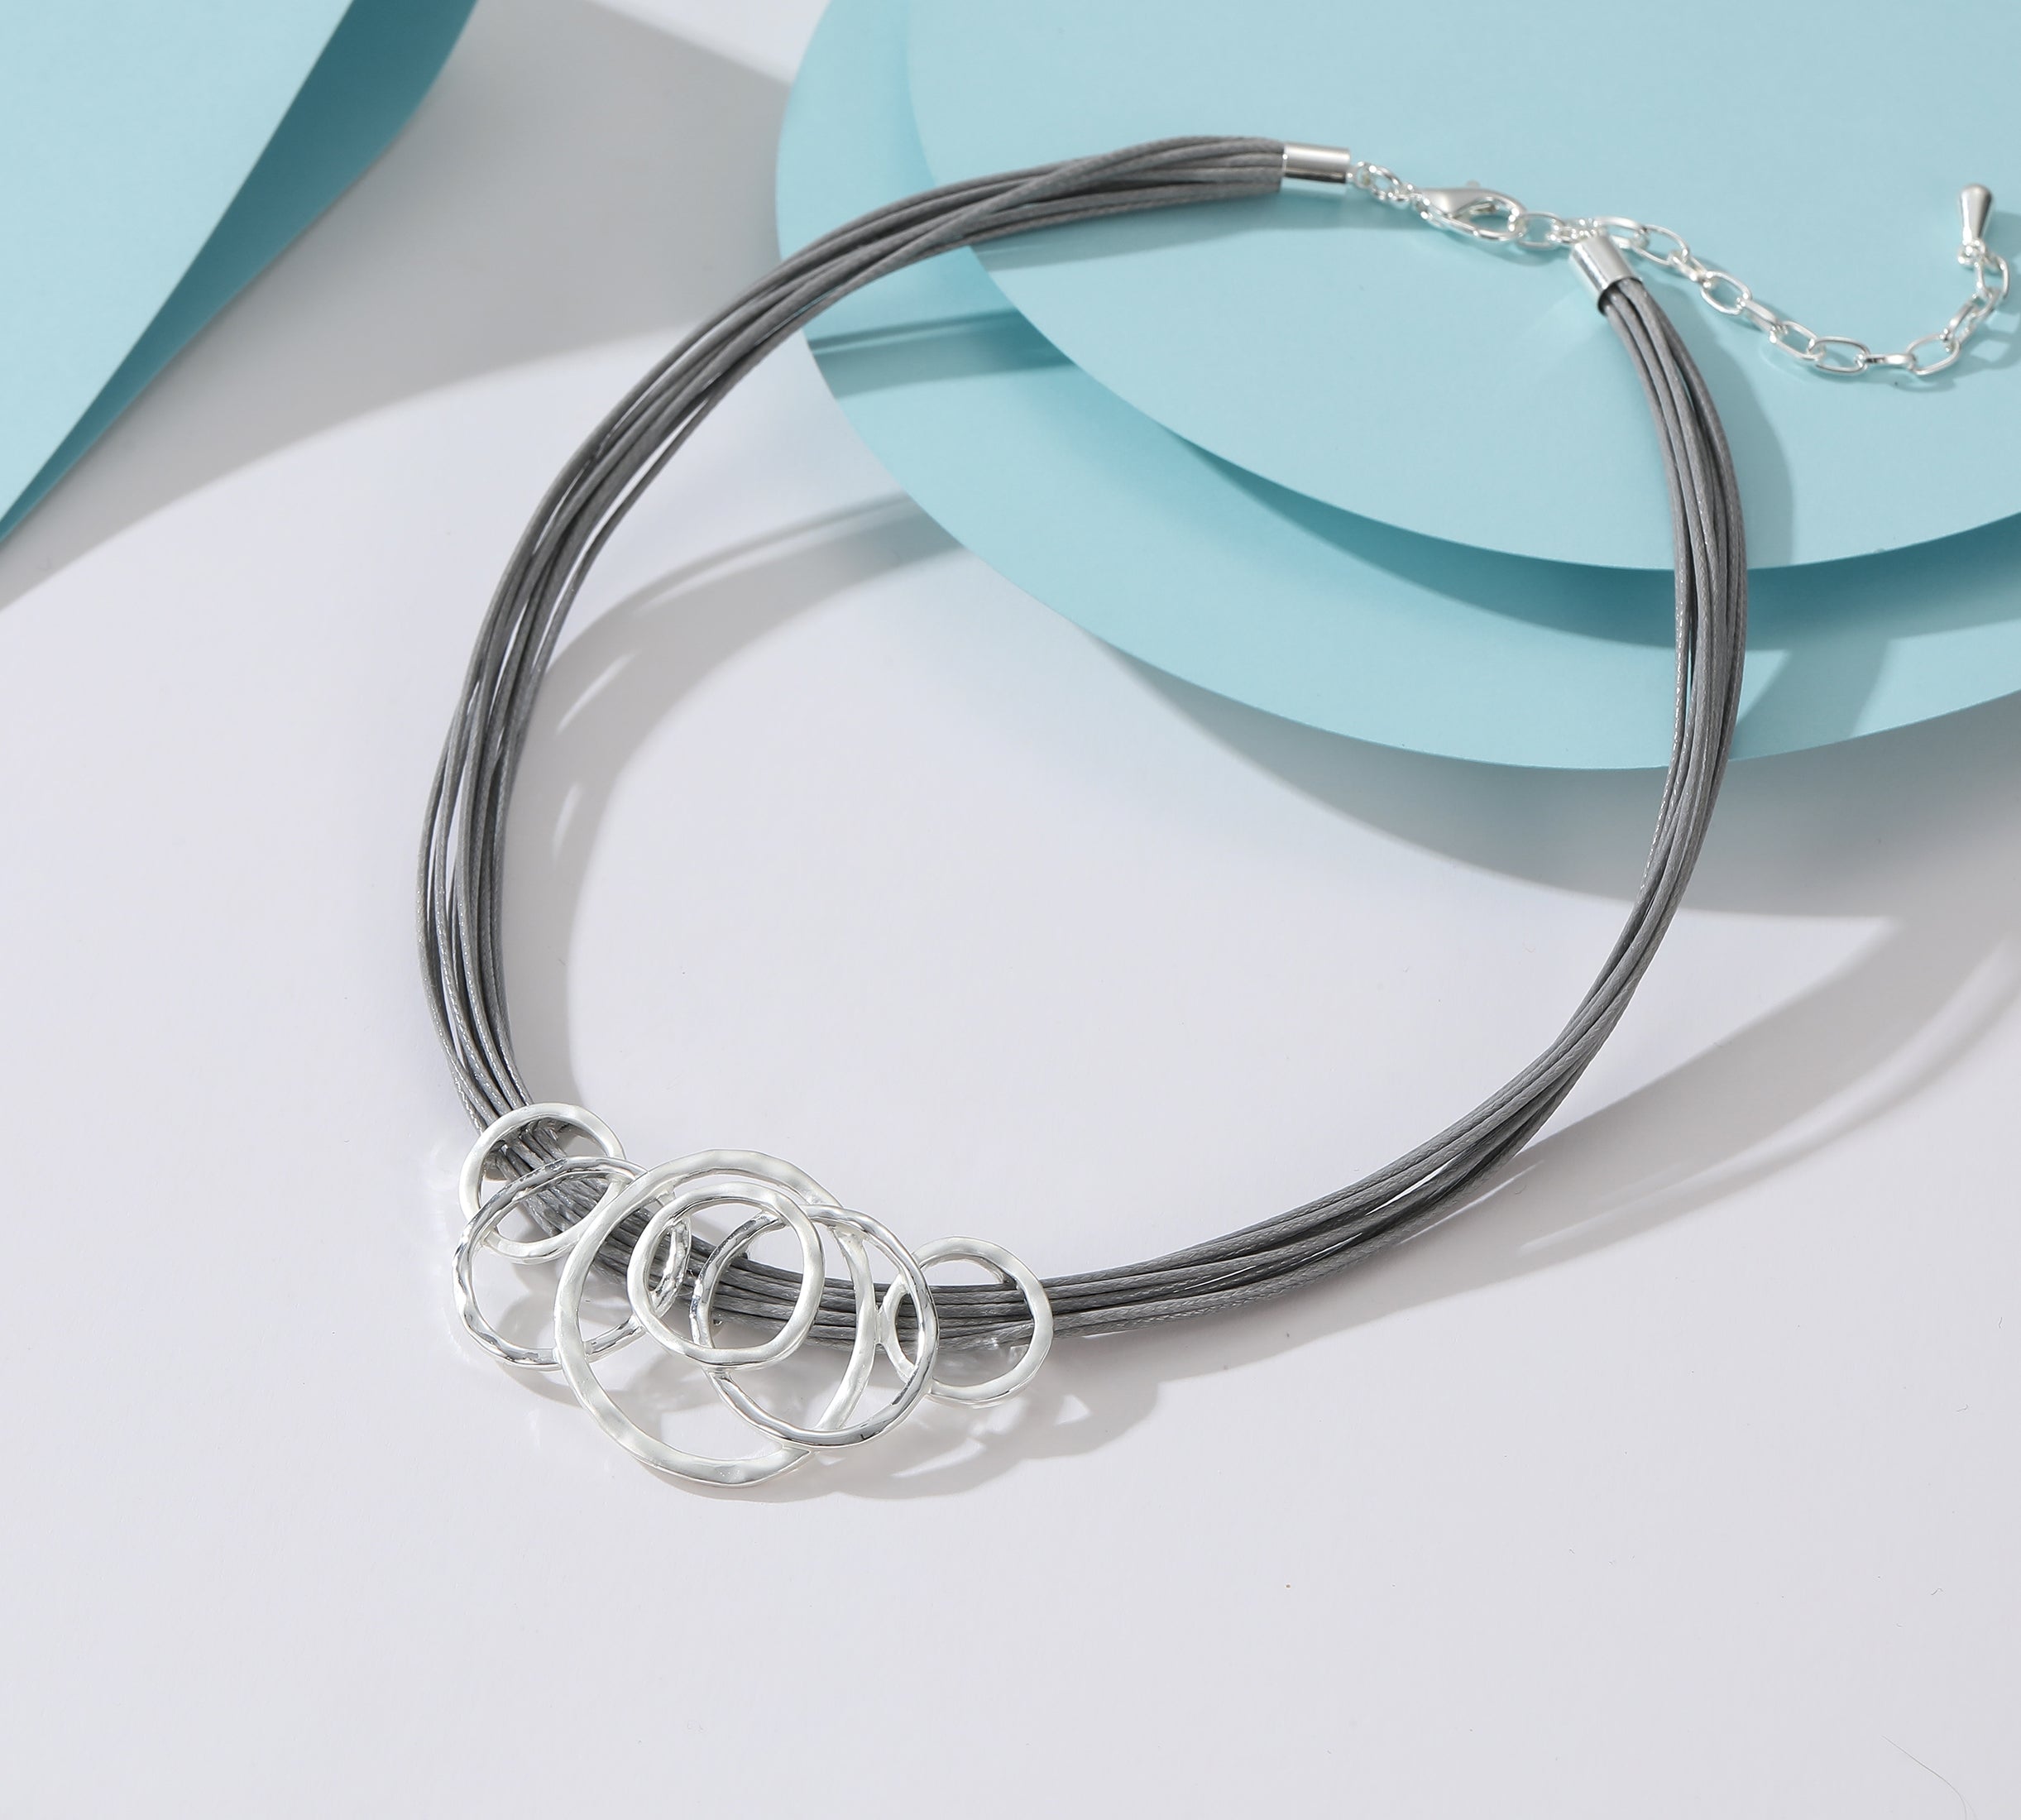 Short necklace, with silver circular inter-linked pendant on grey leather with extension chain